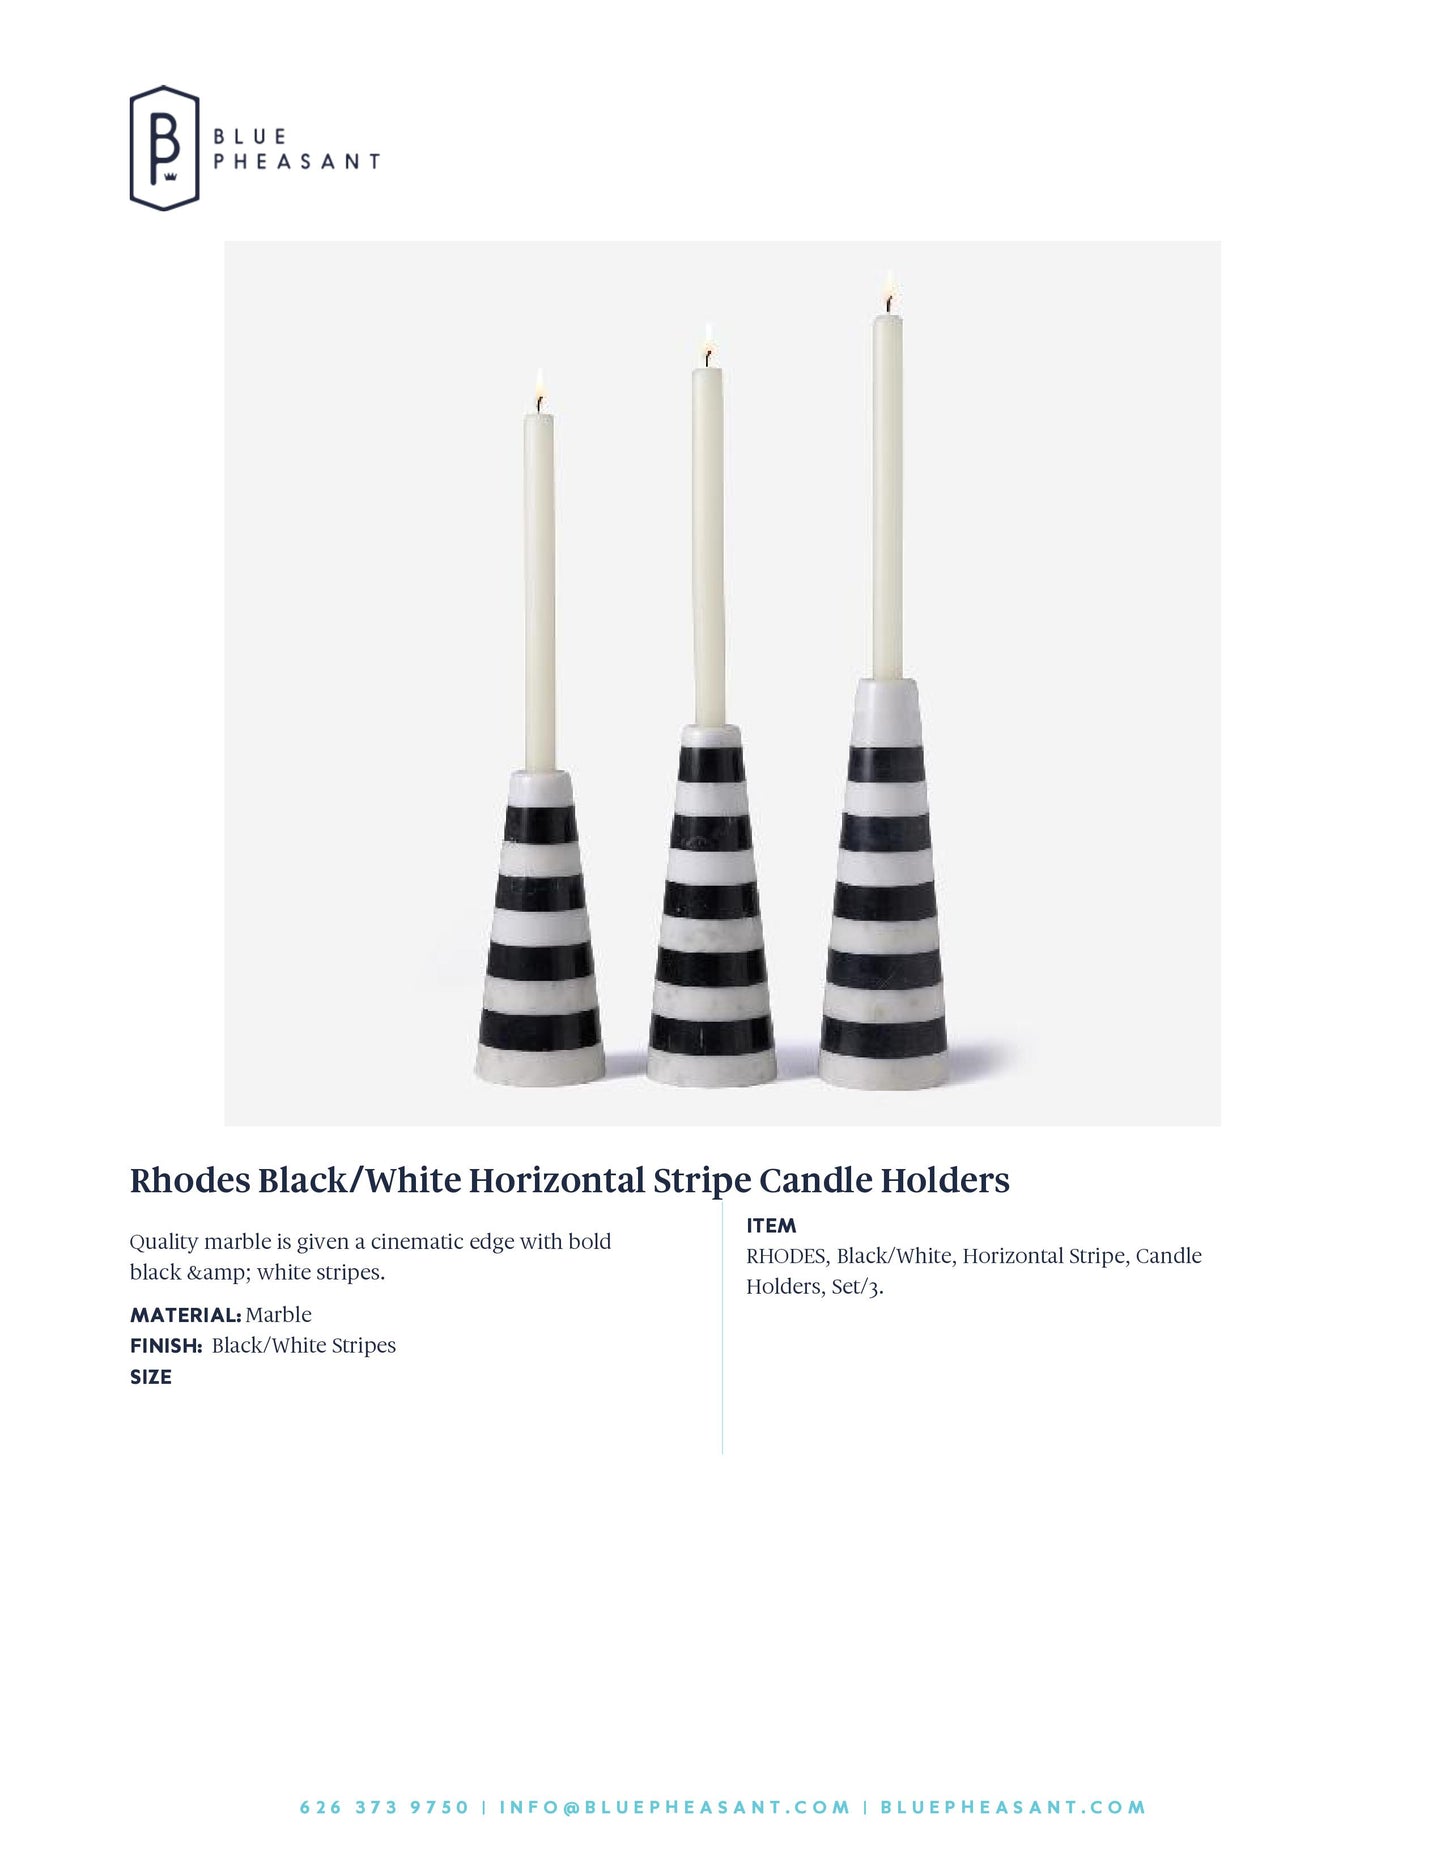 blue pheasant rhodes candle holders tearsheet